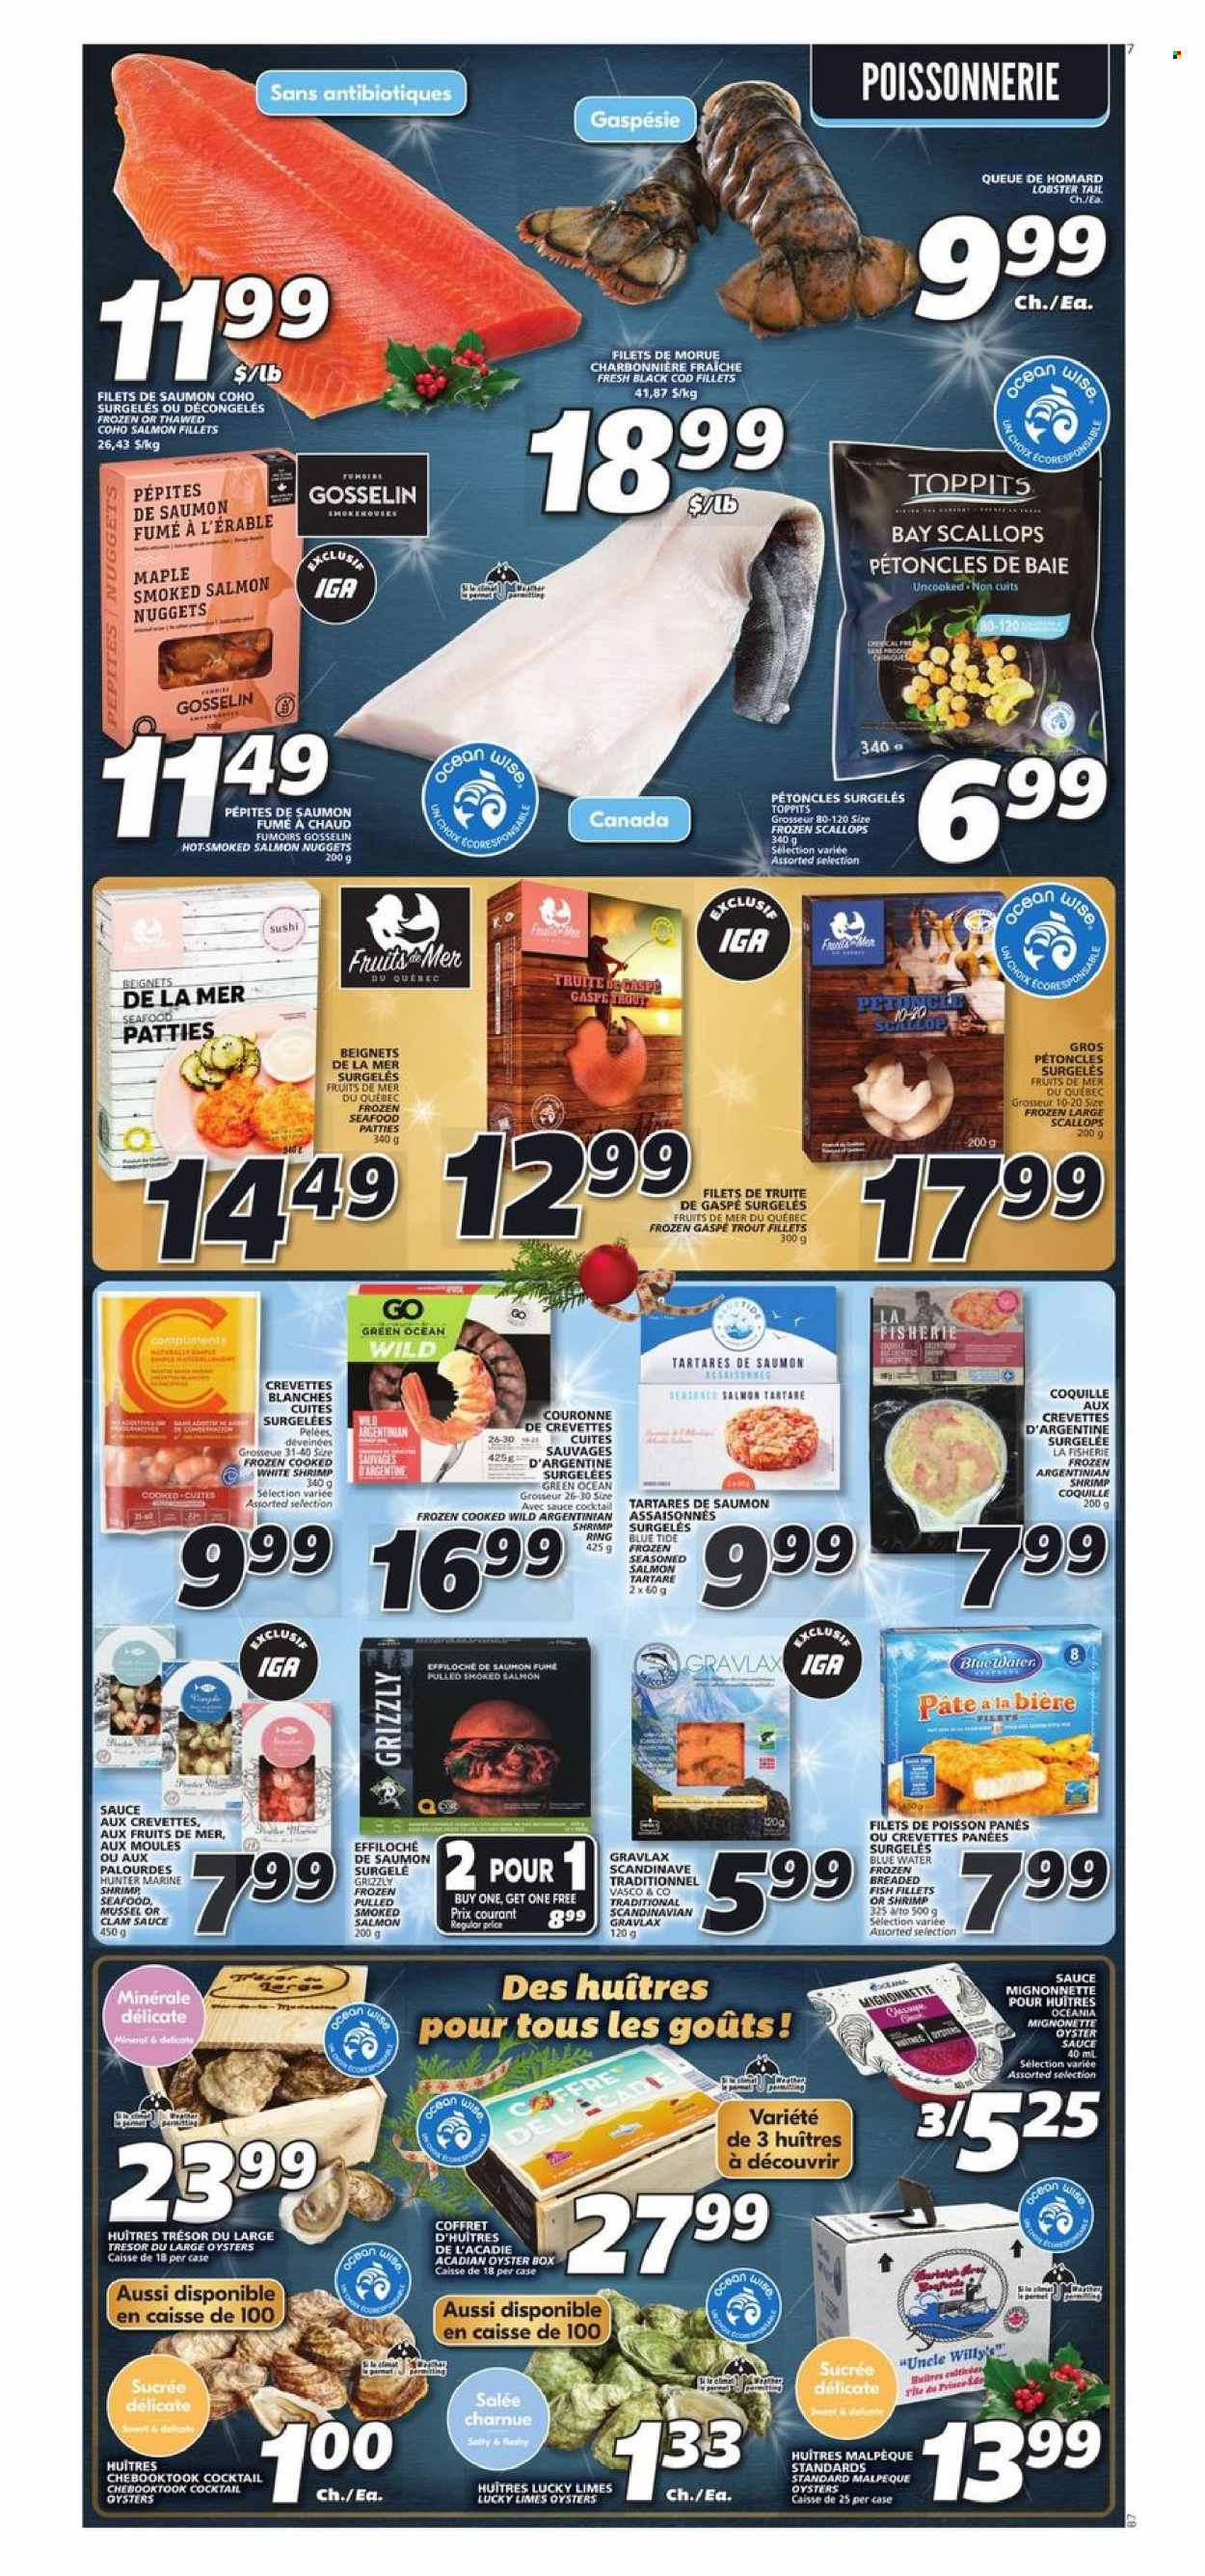 thumbnail - IGA Flyer - December 02, 2021 - December 08, 2021 - Sales products - limes, clams, cod, fish fillets, lobster, mussels, salmon, salmon fillet, scallops, smoked salmon, trout, oysters, seafood, fish, lobster tail, shrimps, nuggets, sauce, breaded fish, oyster sauce. Page 6.